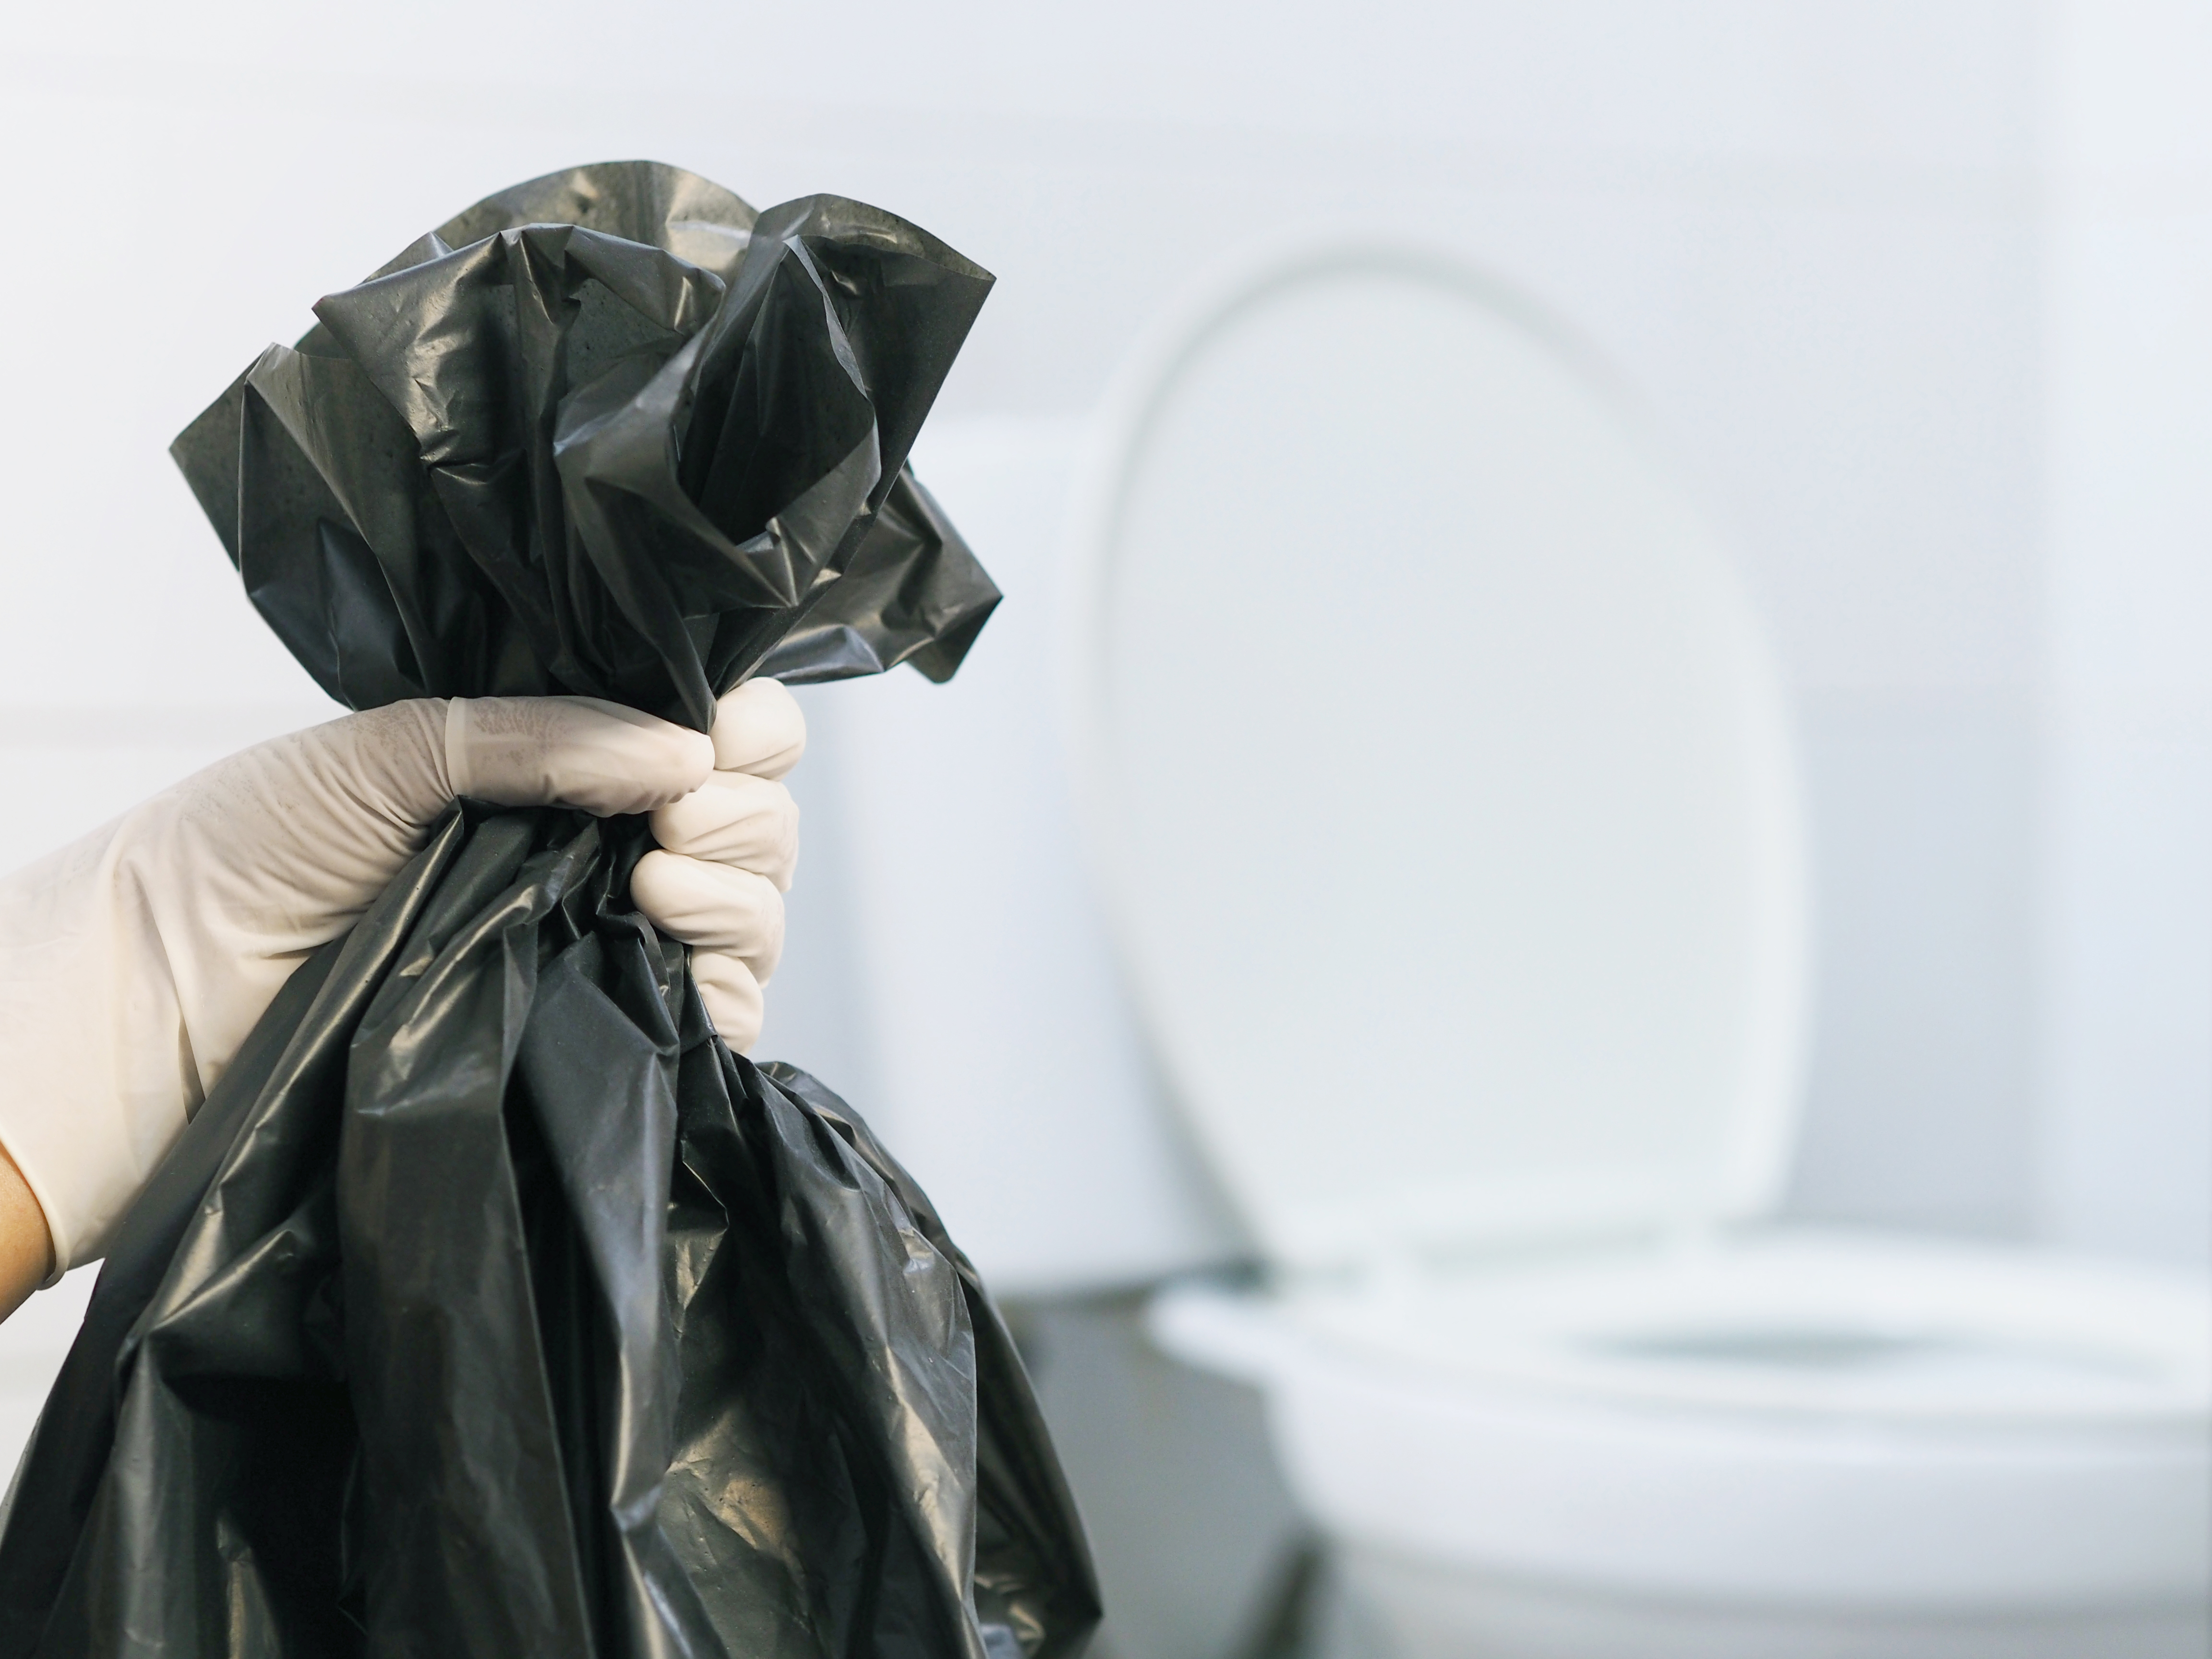 When removing deceased animals from the bathroom, make sure to wear gloves and have a trash bag ready for disposal. | Source: Shutterstock